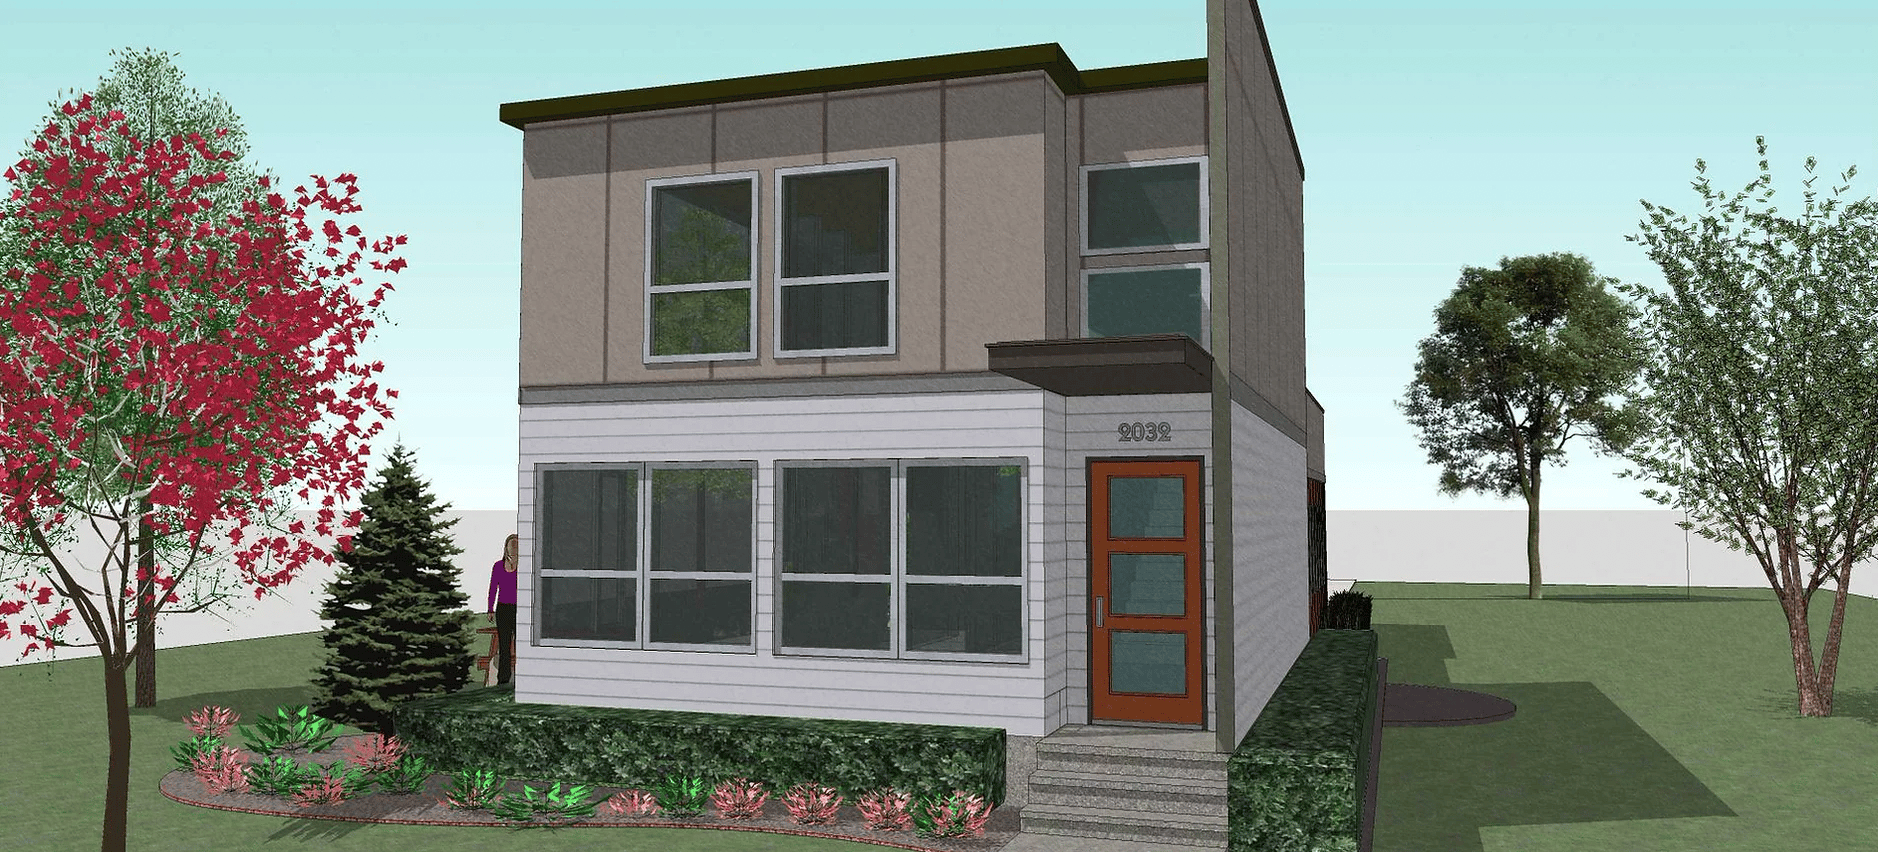 Rendering of a container home